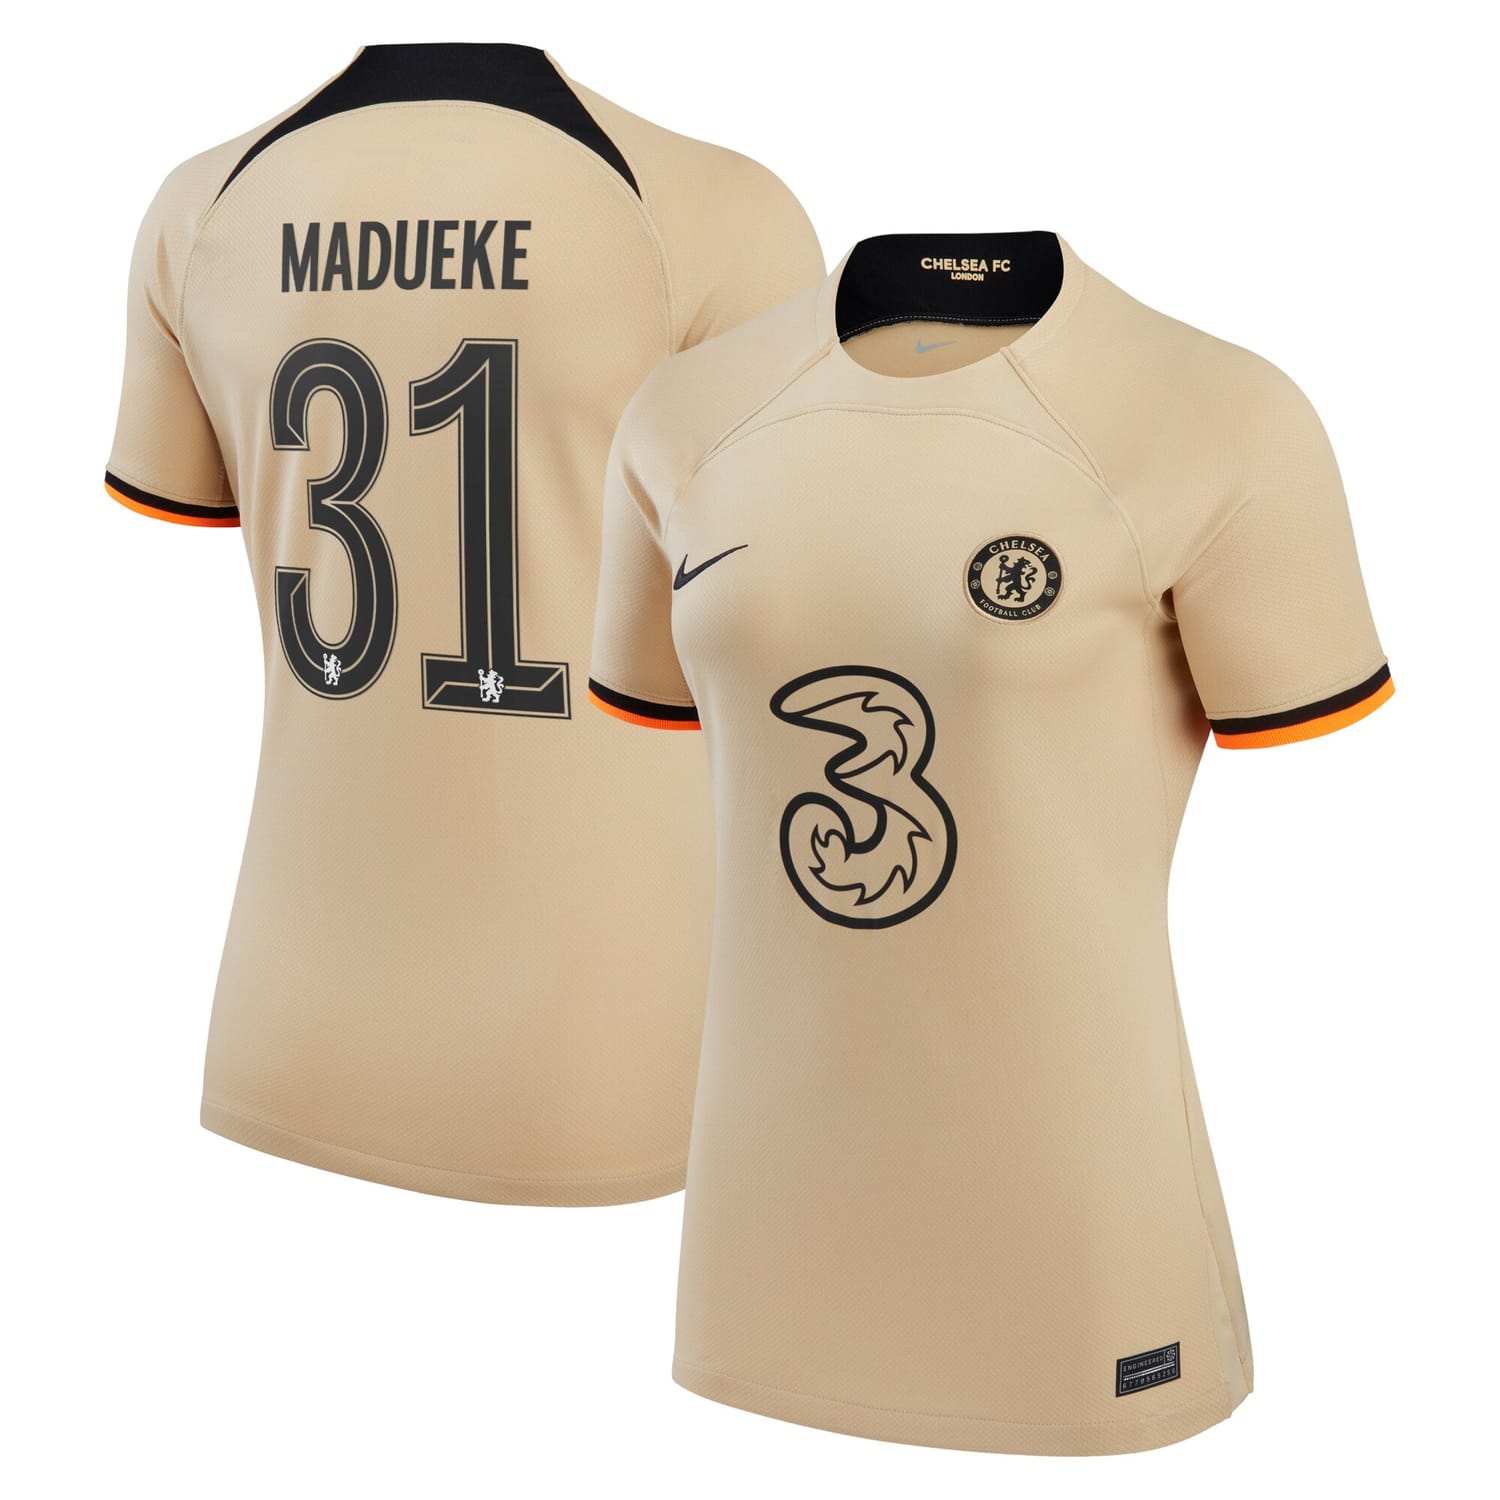 Premier League Chelsea Third Cup Jersey Shirt 2022-23 player Noni Madueke 31 printing for Women